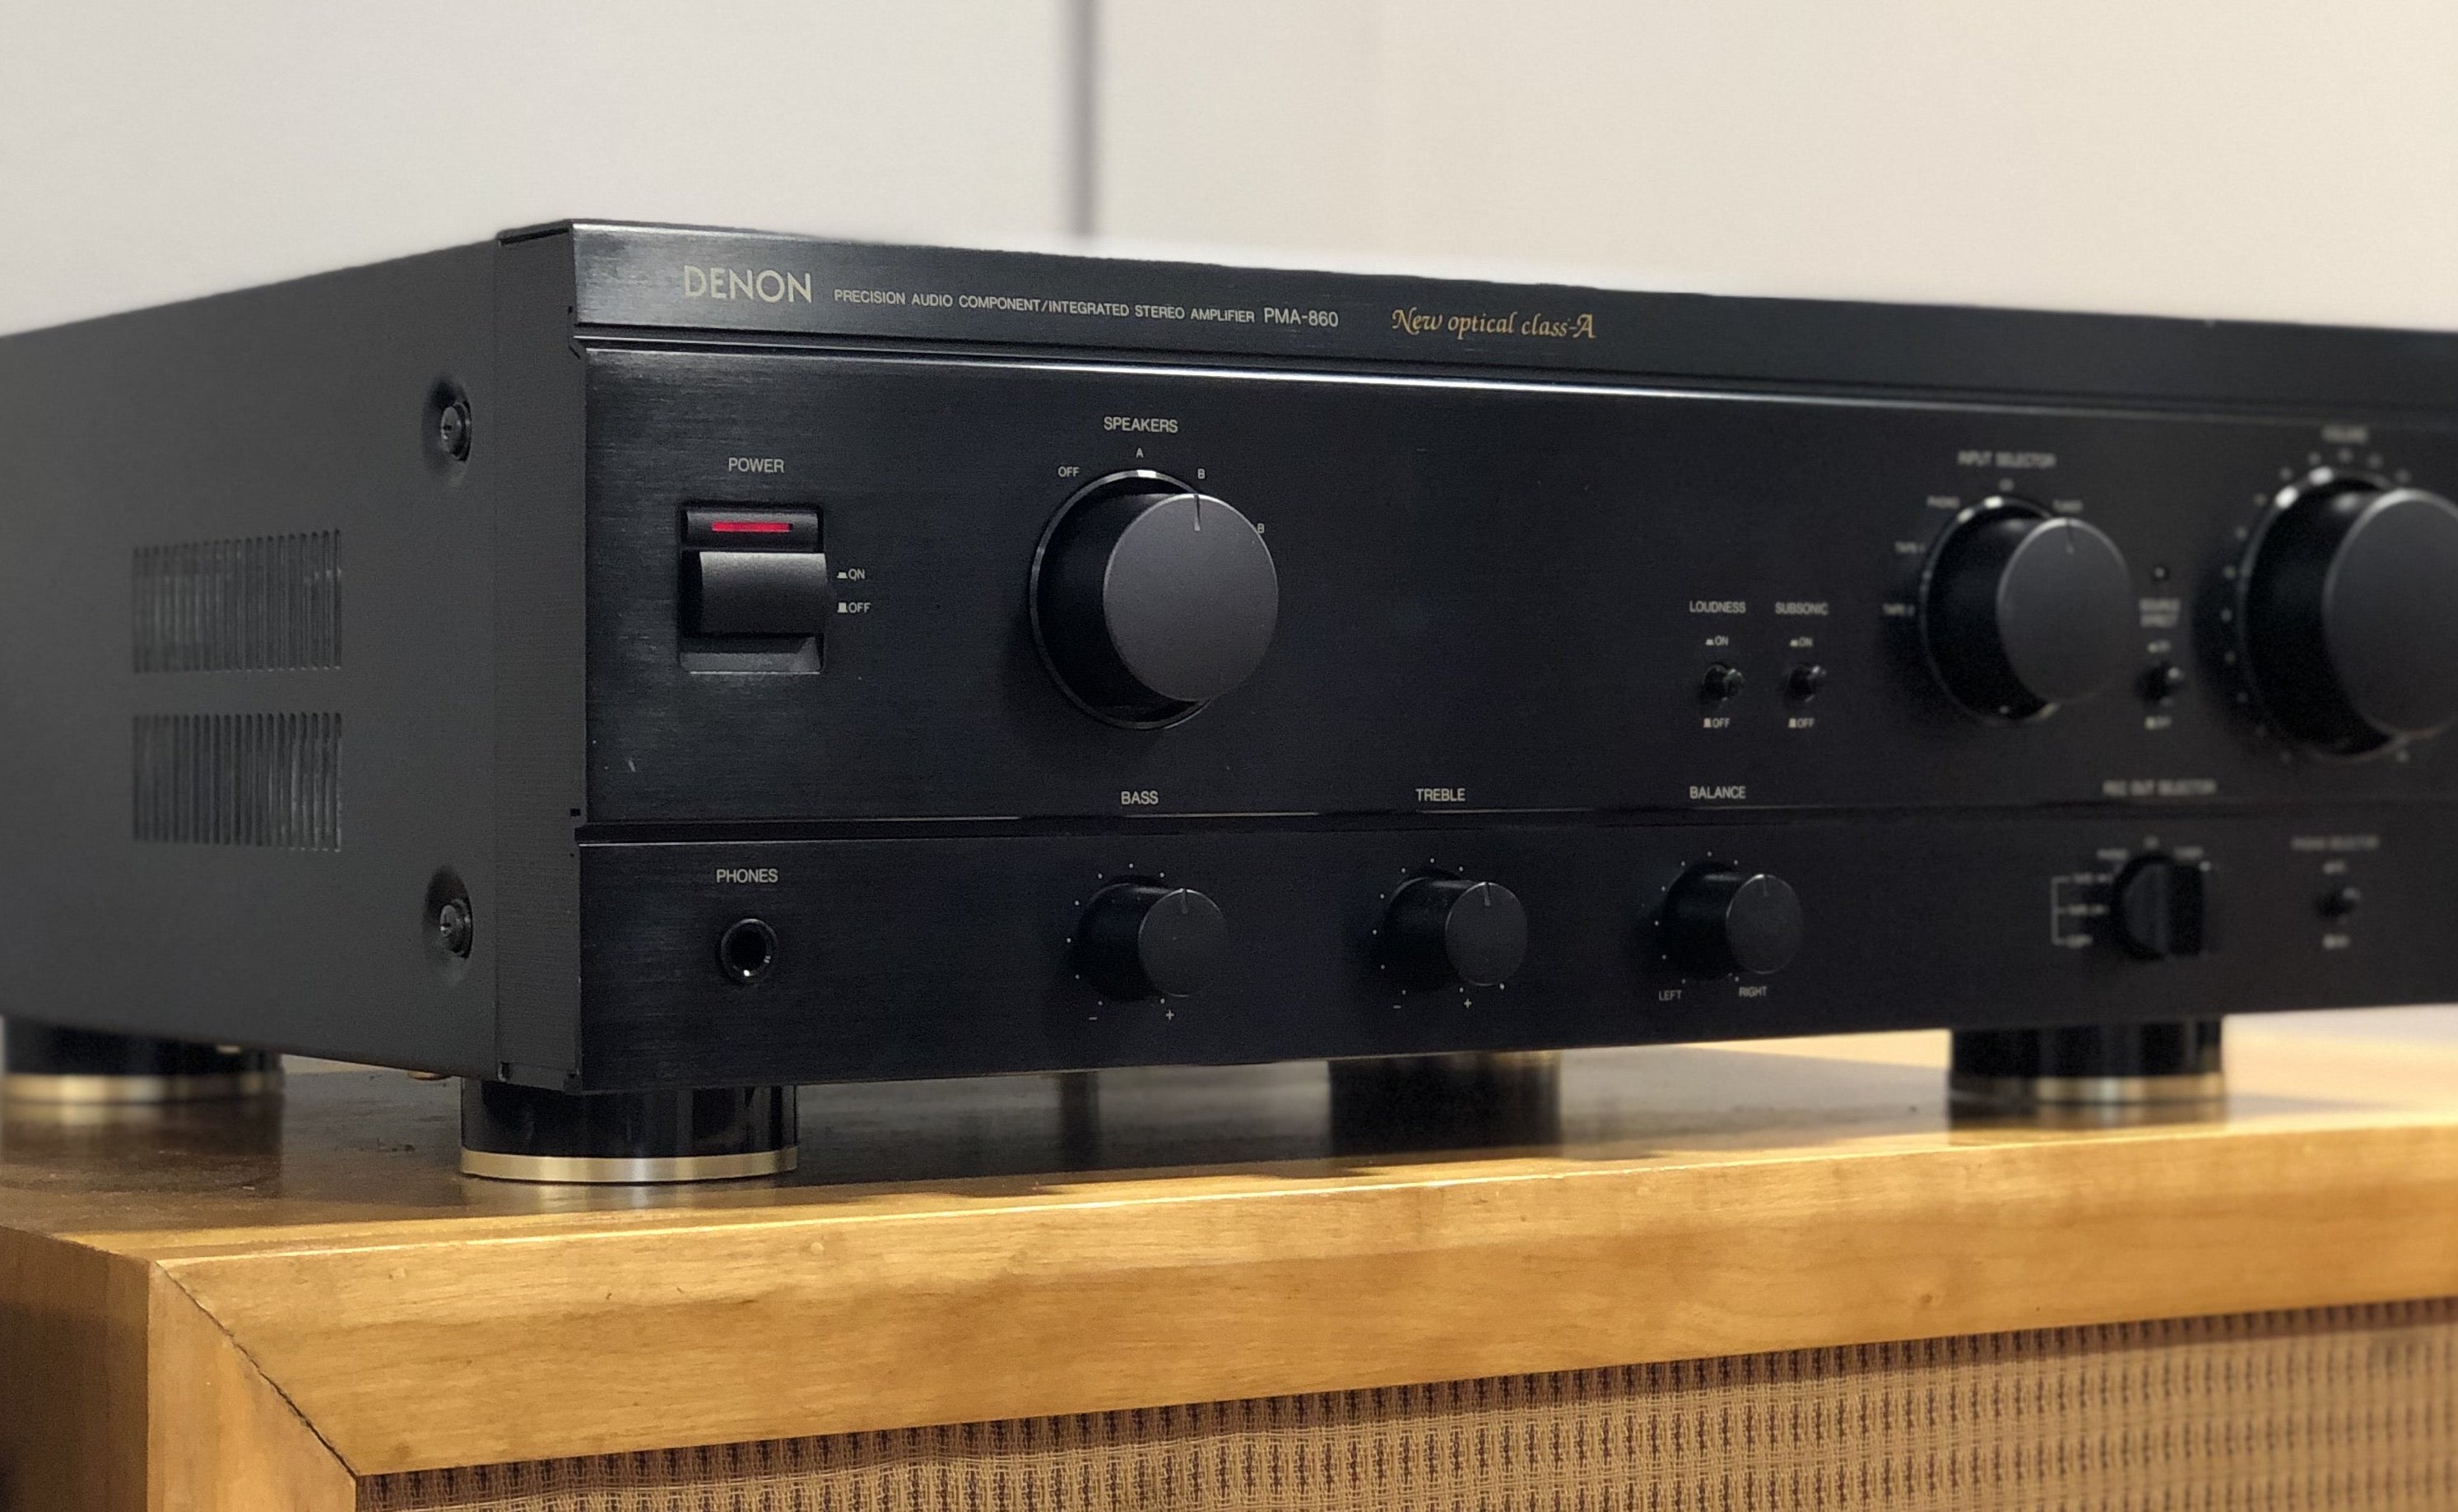 Denon PMA-860 Stereo Integrated Amplifier, Robust Power - SOLD